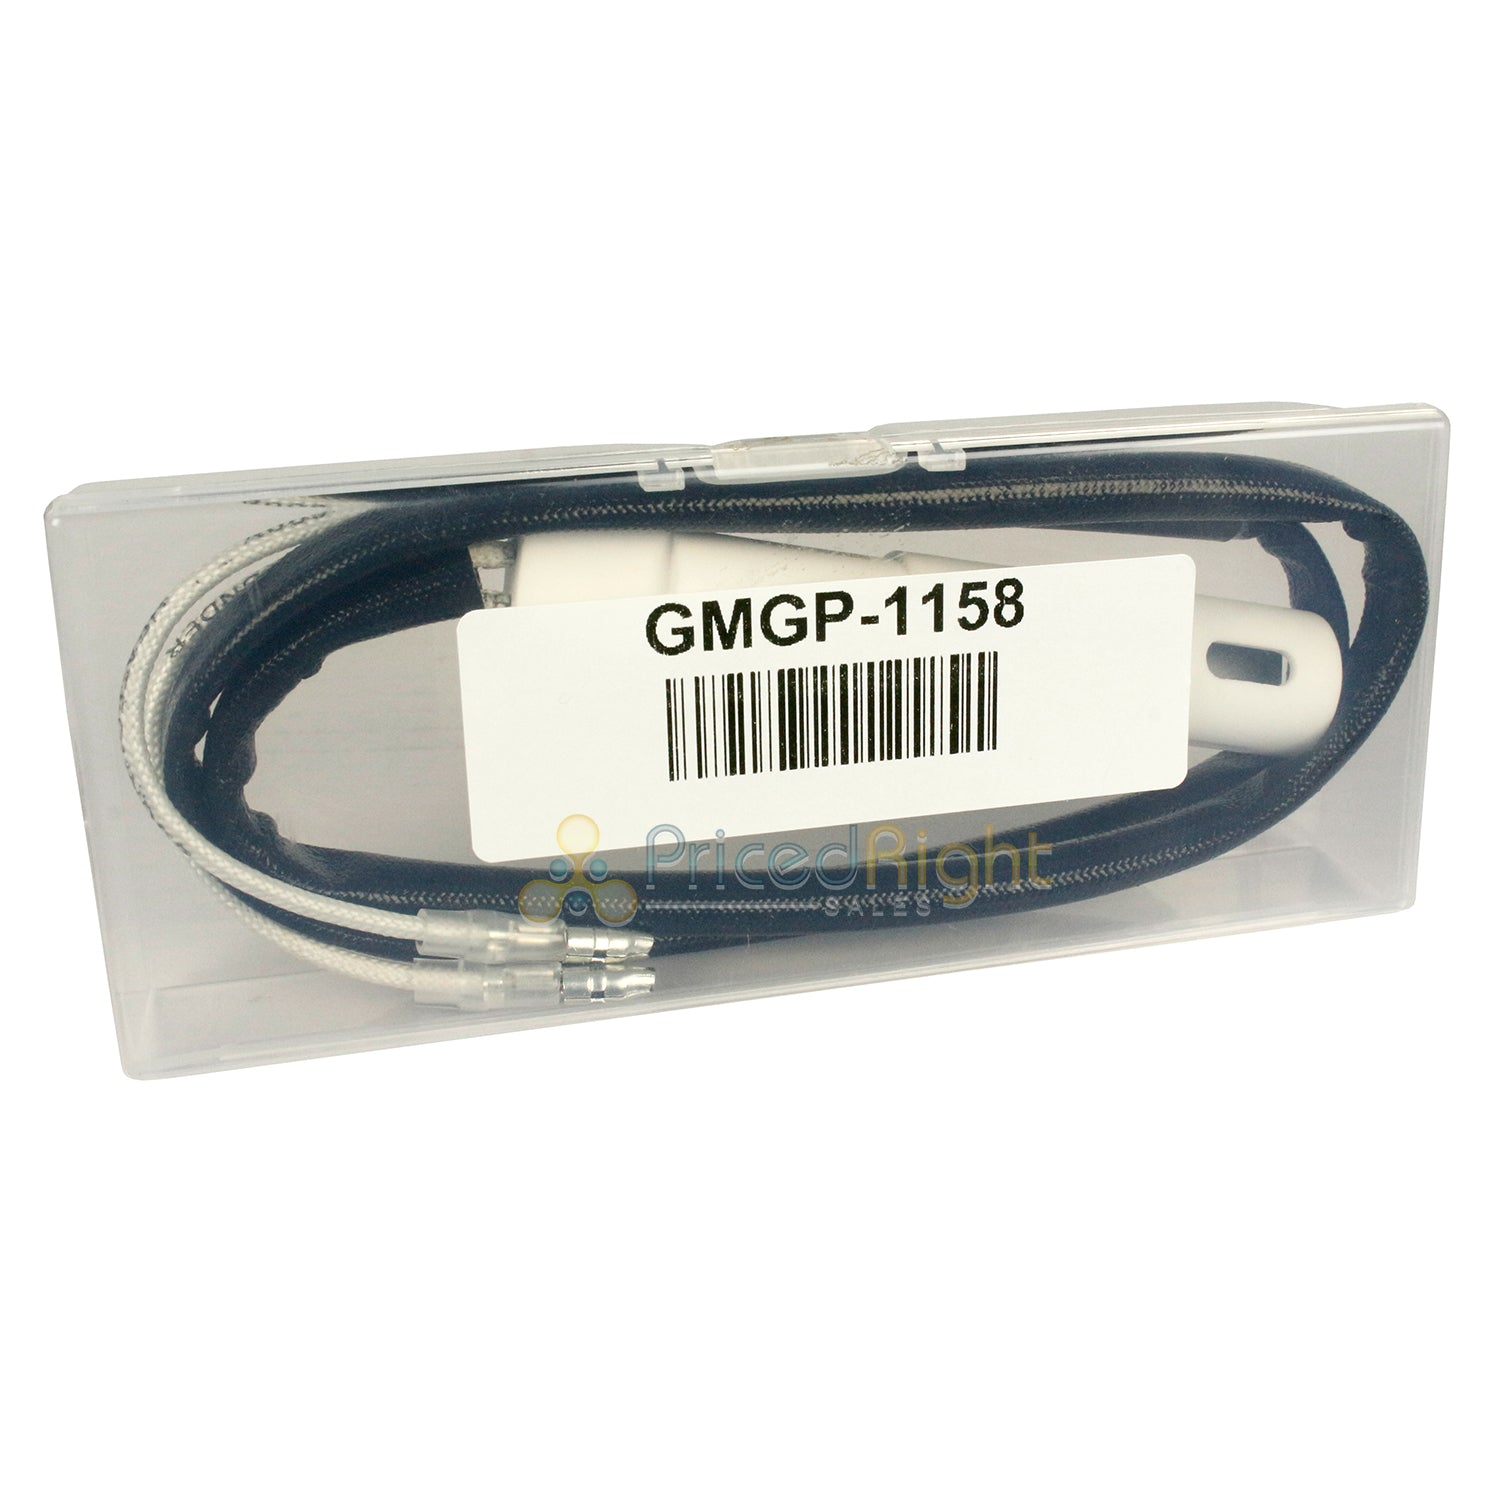 Green Mountain Grills 120V 150W Igniter for Jim Bowie & Daniel Boone GMGP-1158